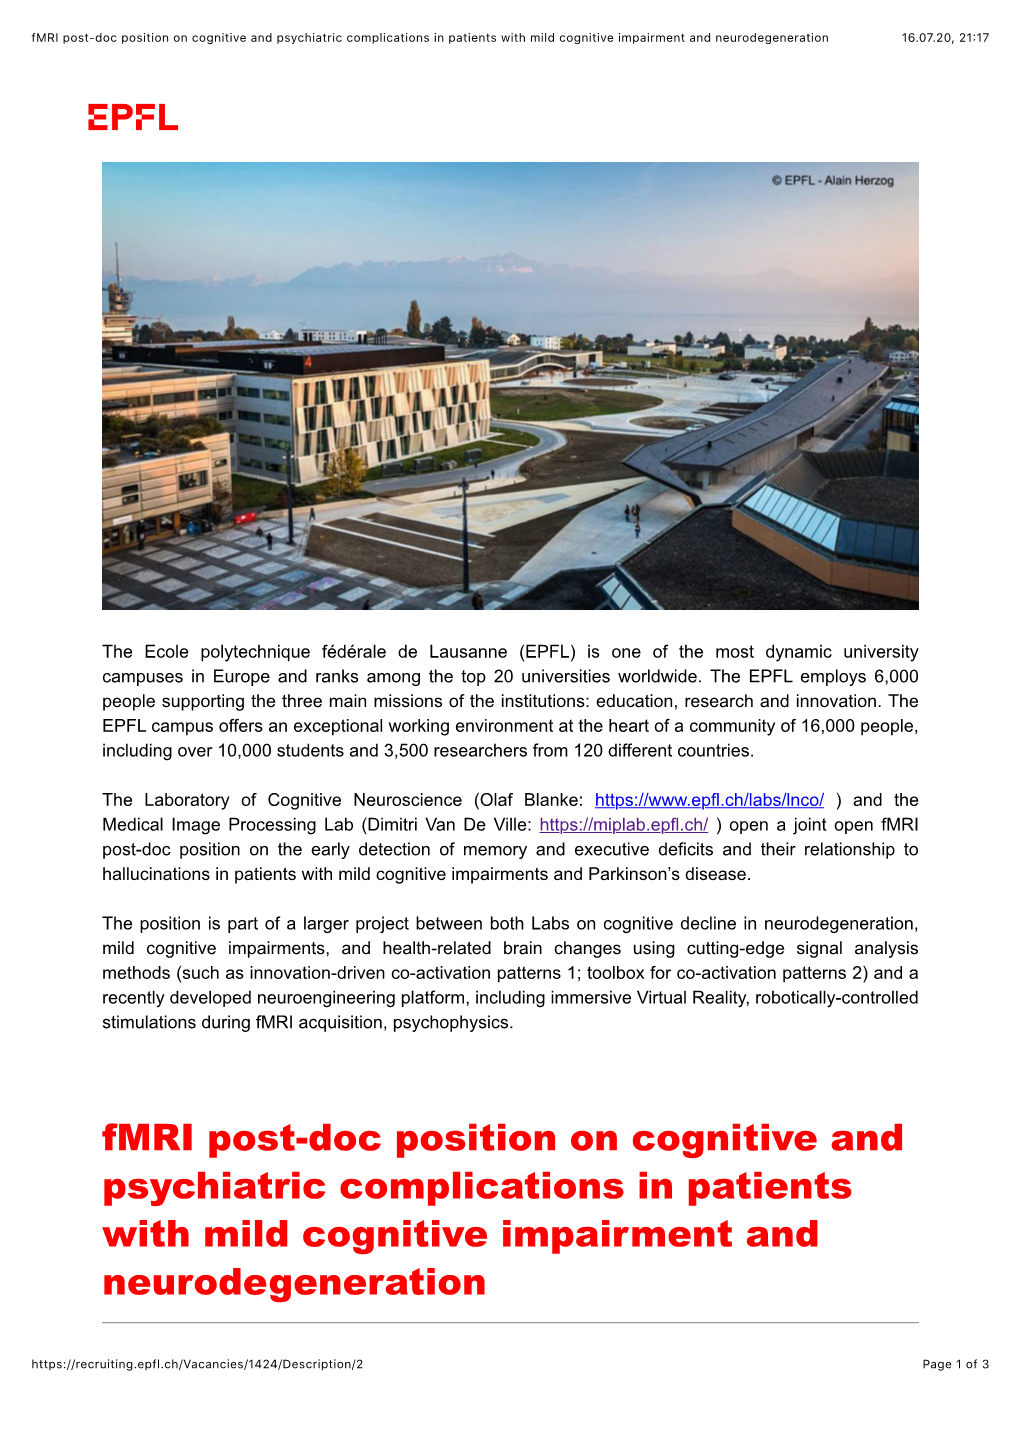 Fmri Post-Doc Position on Cognitive and Psychiatric Complications in Patients with Mild Cognitive Impairment and Neurodegeneration 16.07.20, 21:17